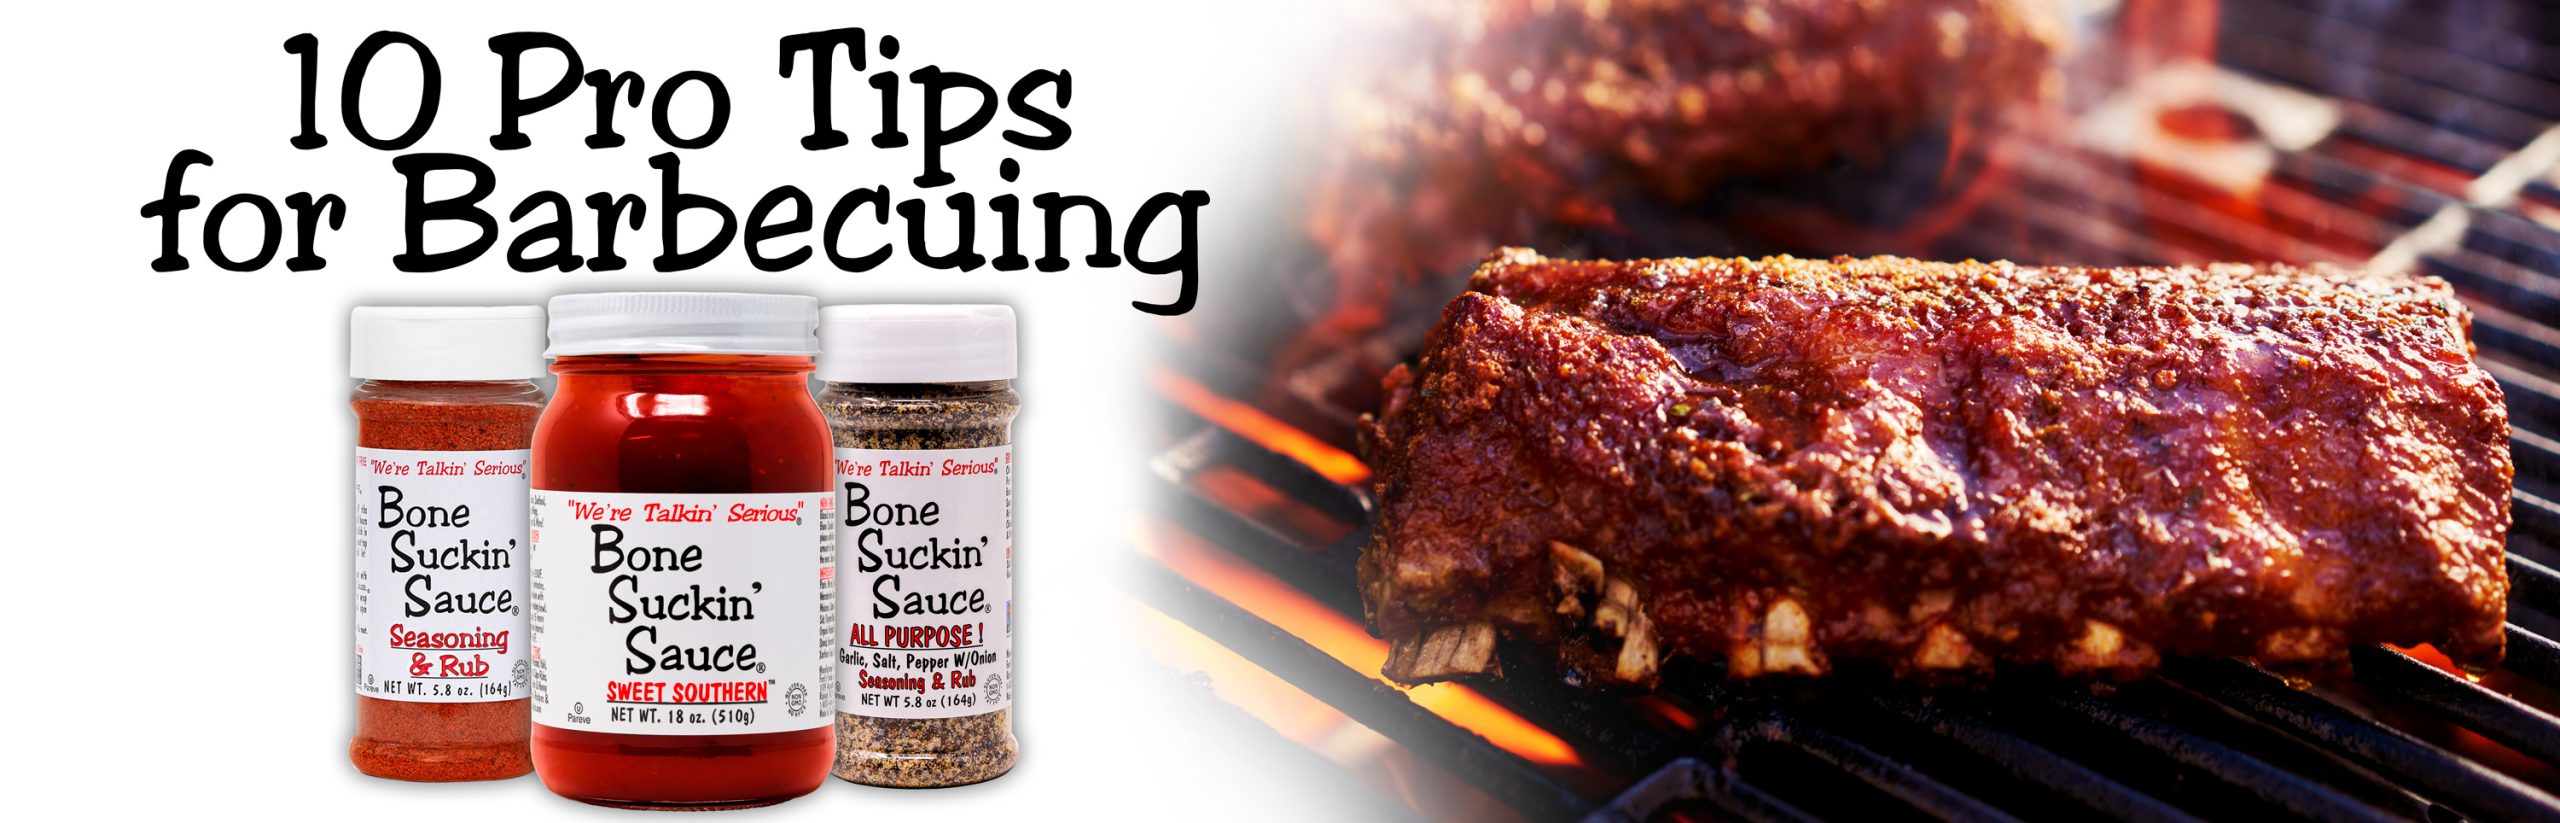 10 Pro Tips for Barbecuing with Jars of Original Bone Suckin' Seasoning, Bone Suckin' Sauce, and All Purpose Seasoning & Rub next to ribs on the grill